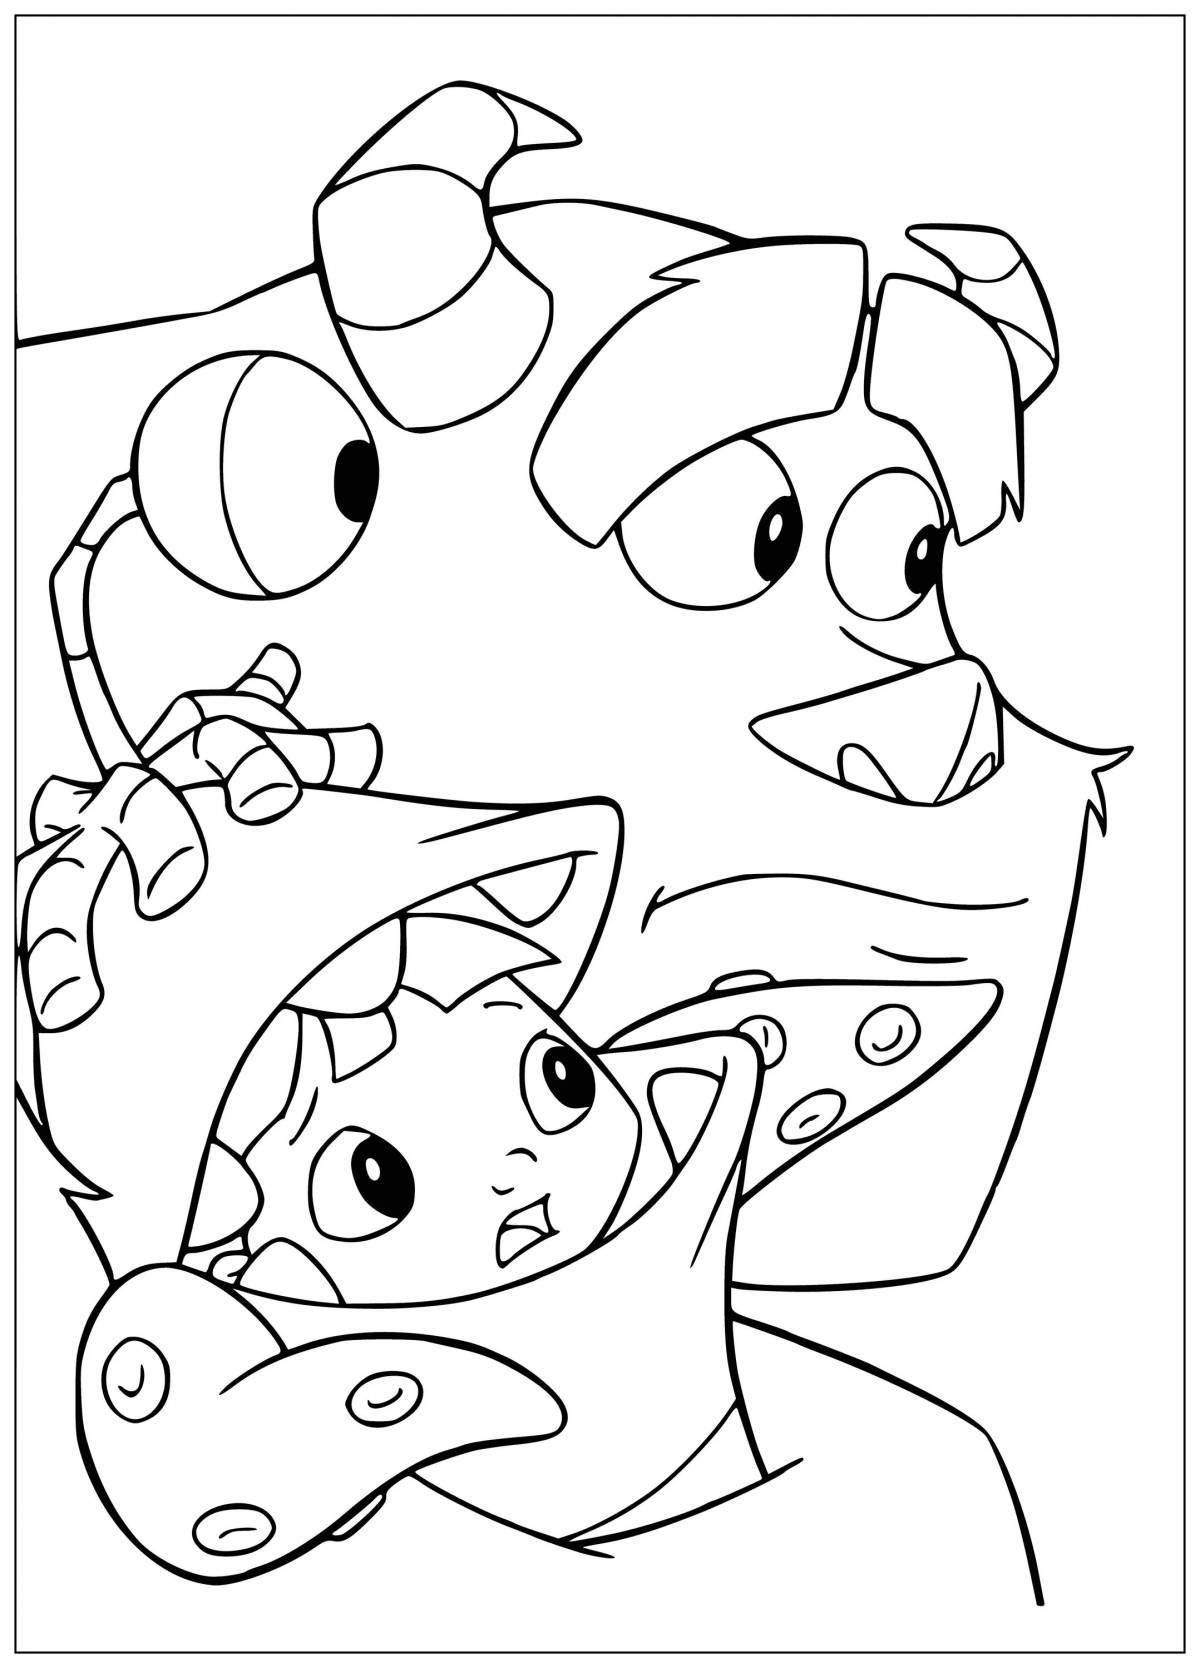 Color-joyful sally and boo coloring page